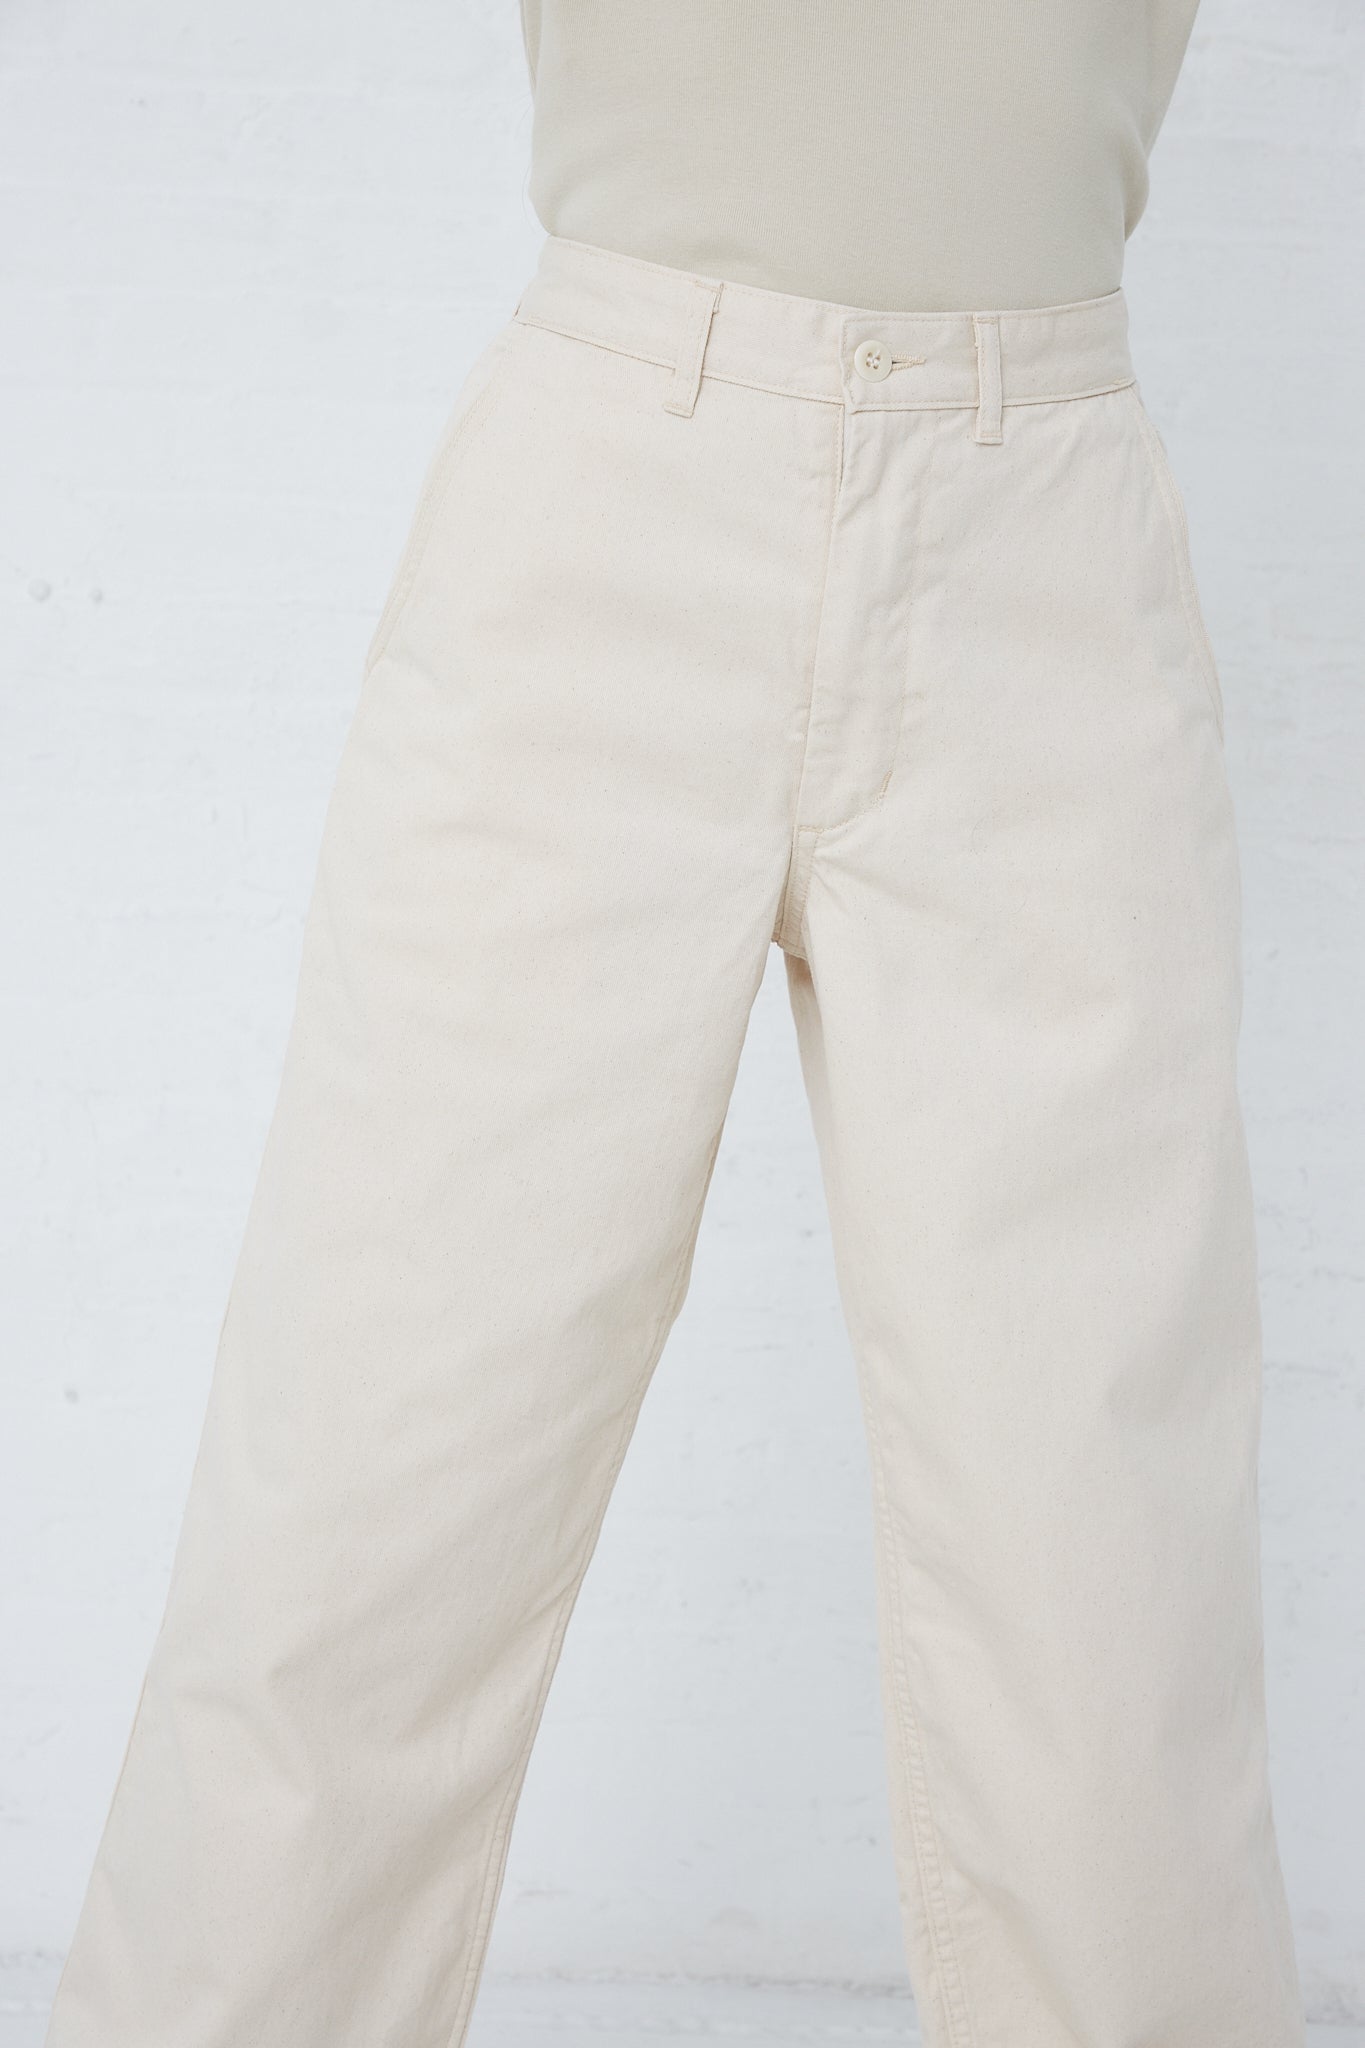 A woman donning As Ever's 51 Chino in Natural pants and a white shirt.